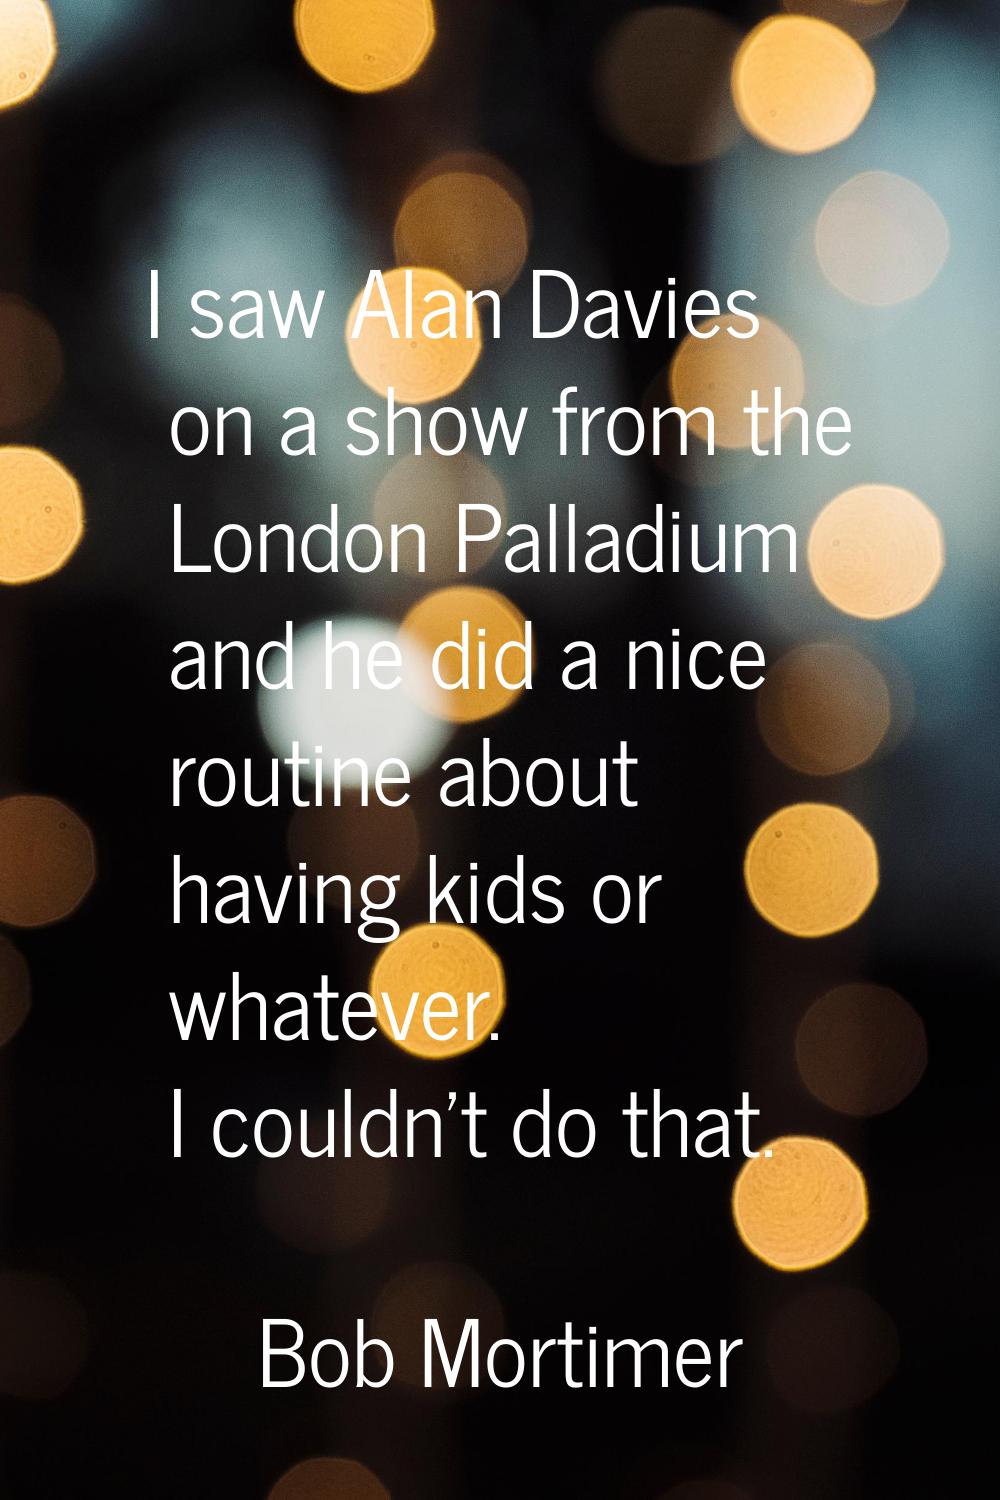 I saw Alan Davies on a show from the London Palladium and he did a nice routine about having kids o